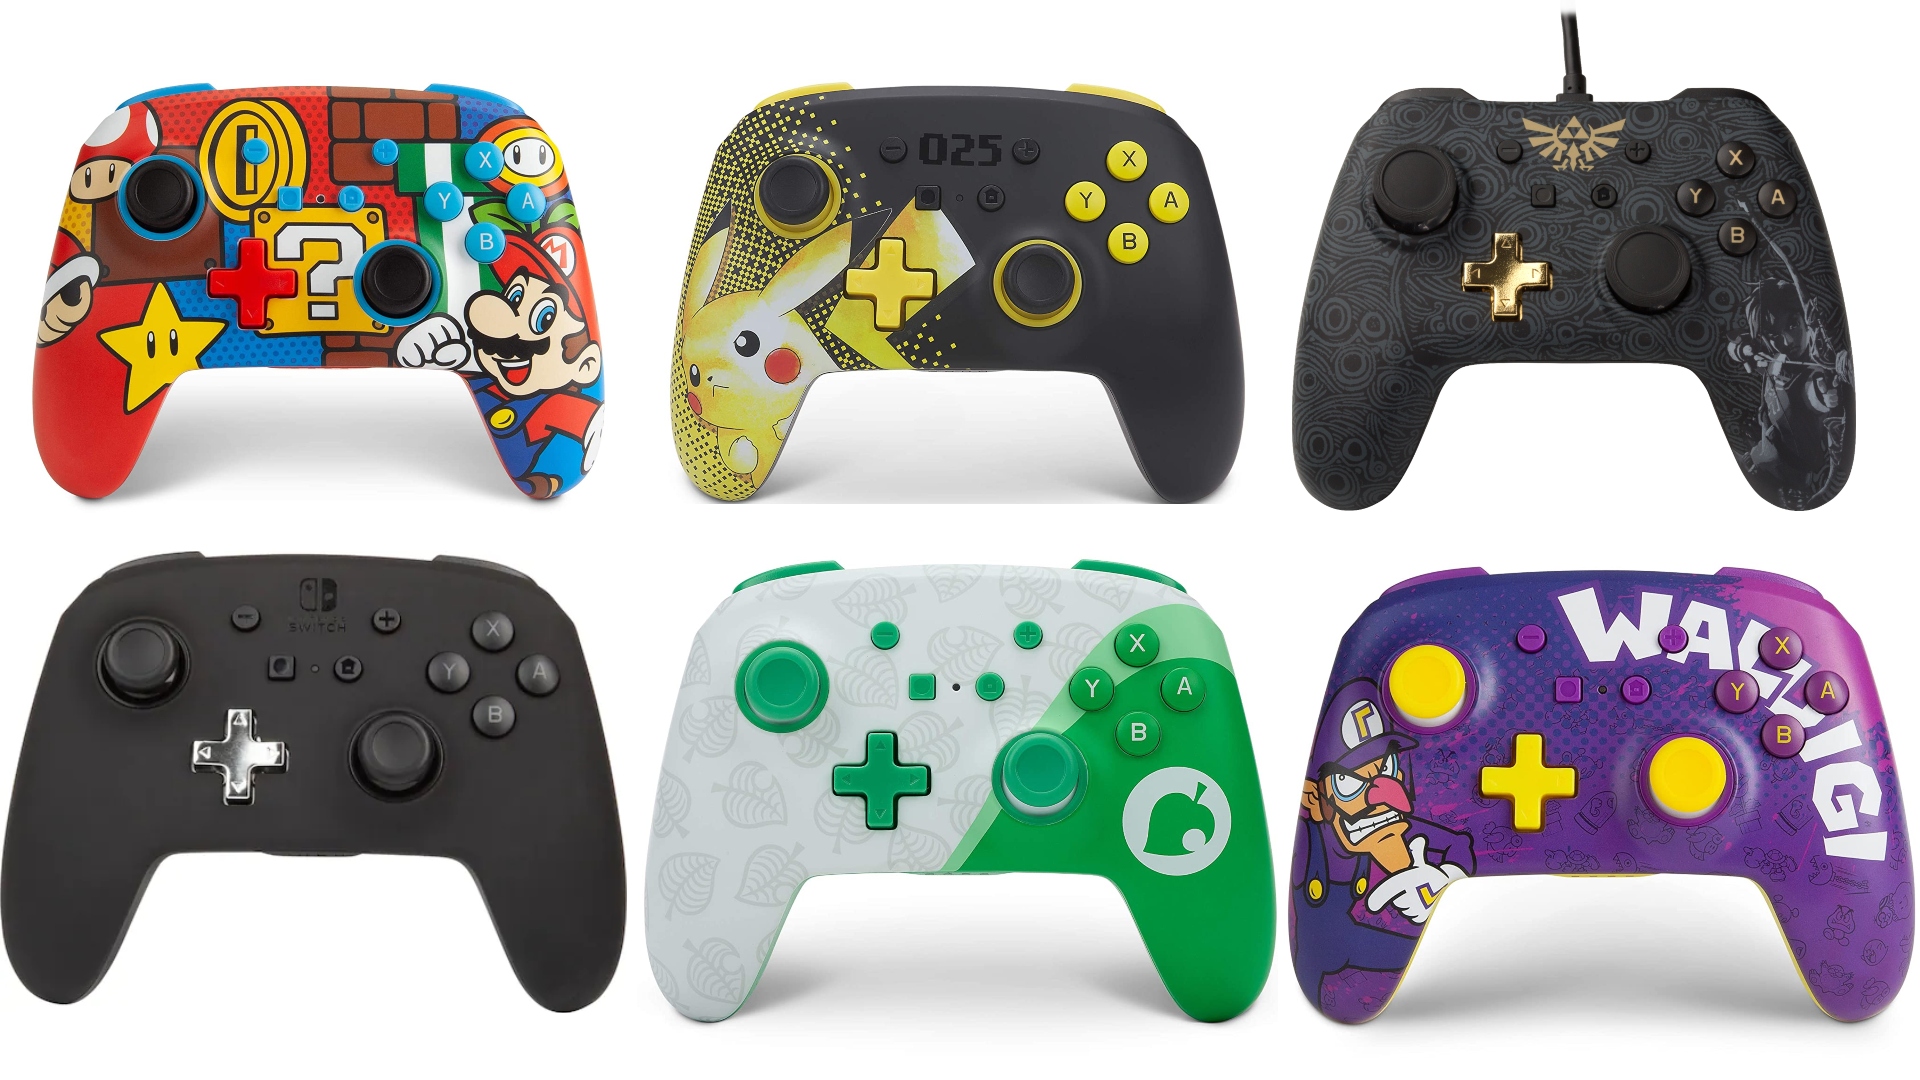 Nintendo Switch Controller drifting? Try PowerA enhanced Switch controllers - image shows a variety of styles, including a Mario controller, a Pikachu controller, a plain black controller, an Animal Crossing controller, and a Waluigi controller.